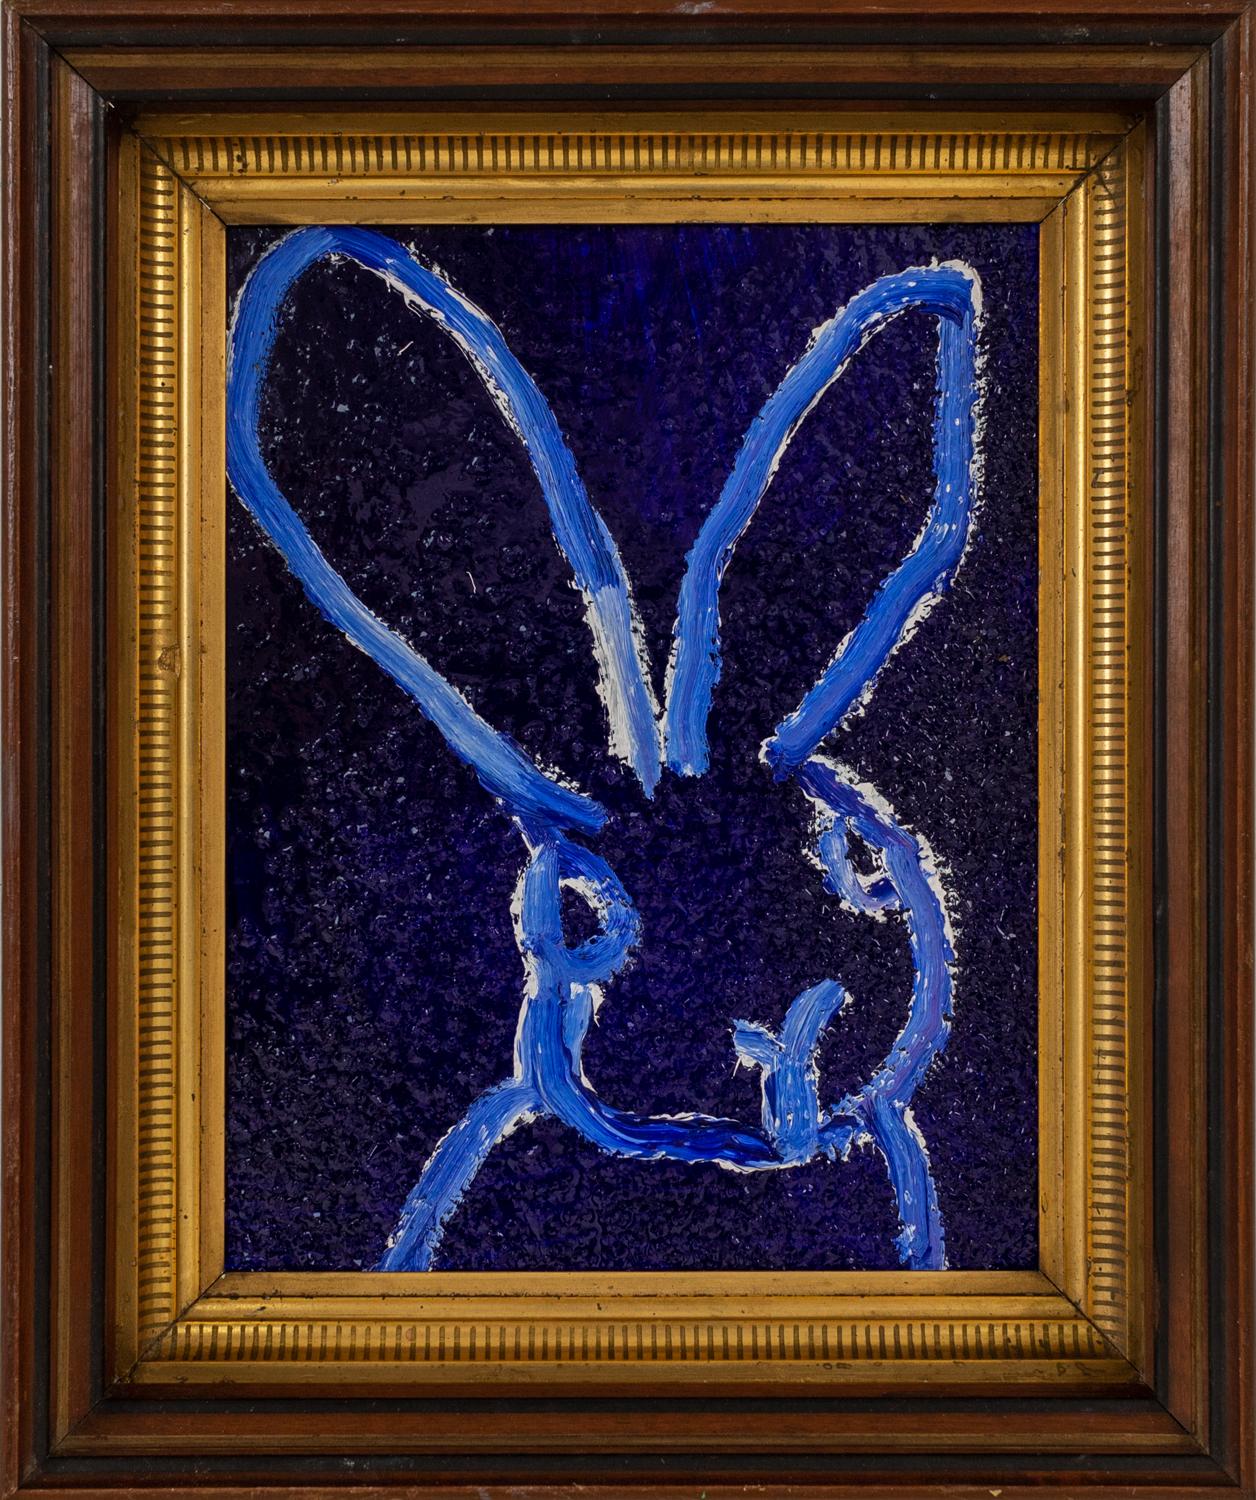 Hunt Slonem Untitled Blue Diamond Dust Bunny
White & light blue gestured bunny on a dark blue diamond dust surfaces in a wooden vintage frame

Unframed: 10 x 8 inches
Framed: 13 x 10.5 inches
*painting is framed*

Hunt Slonem is a well-renowned